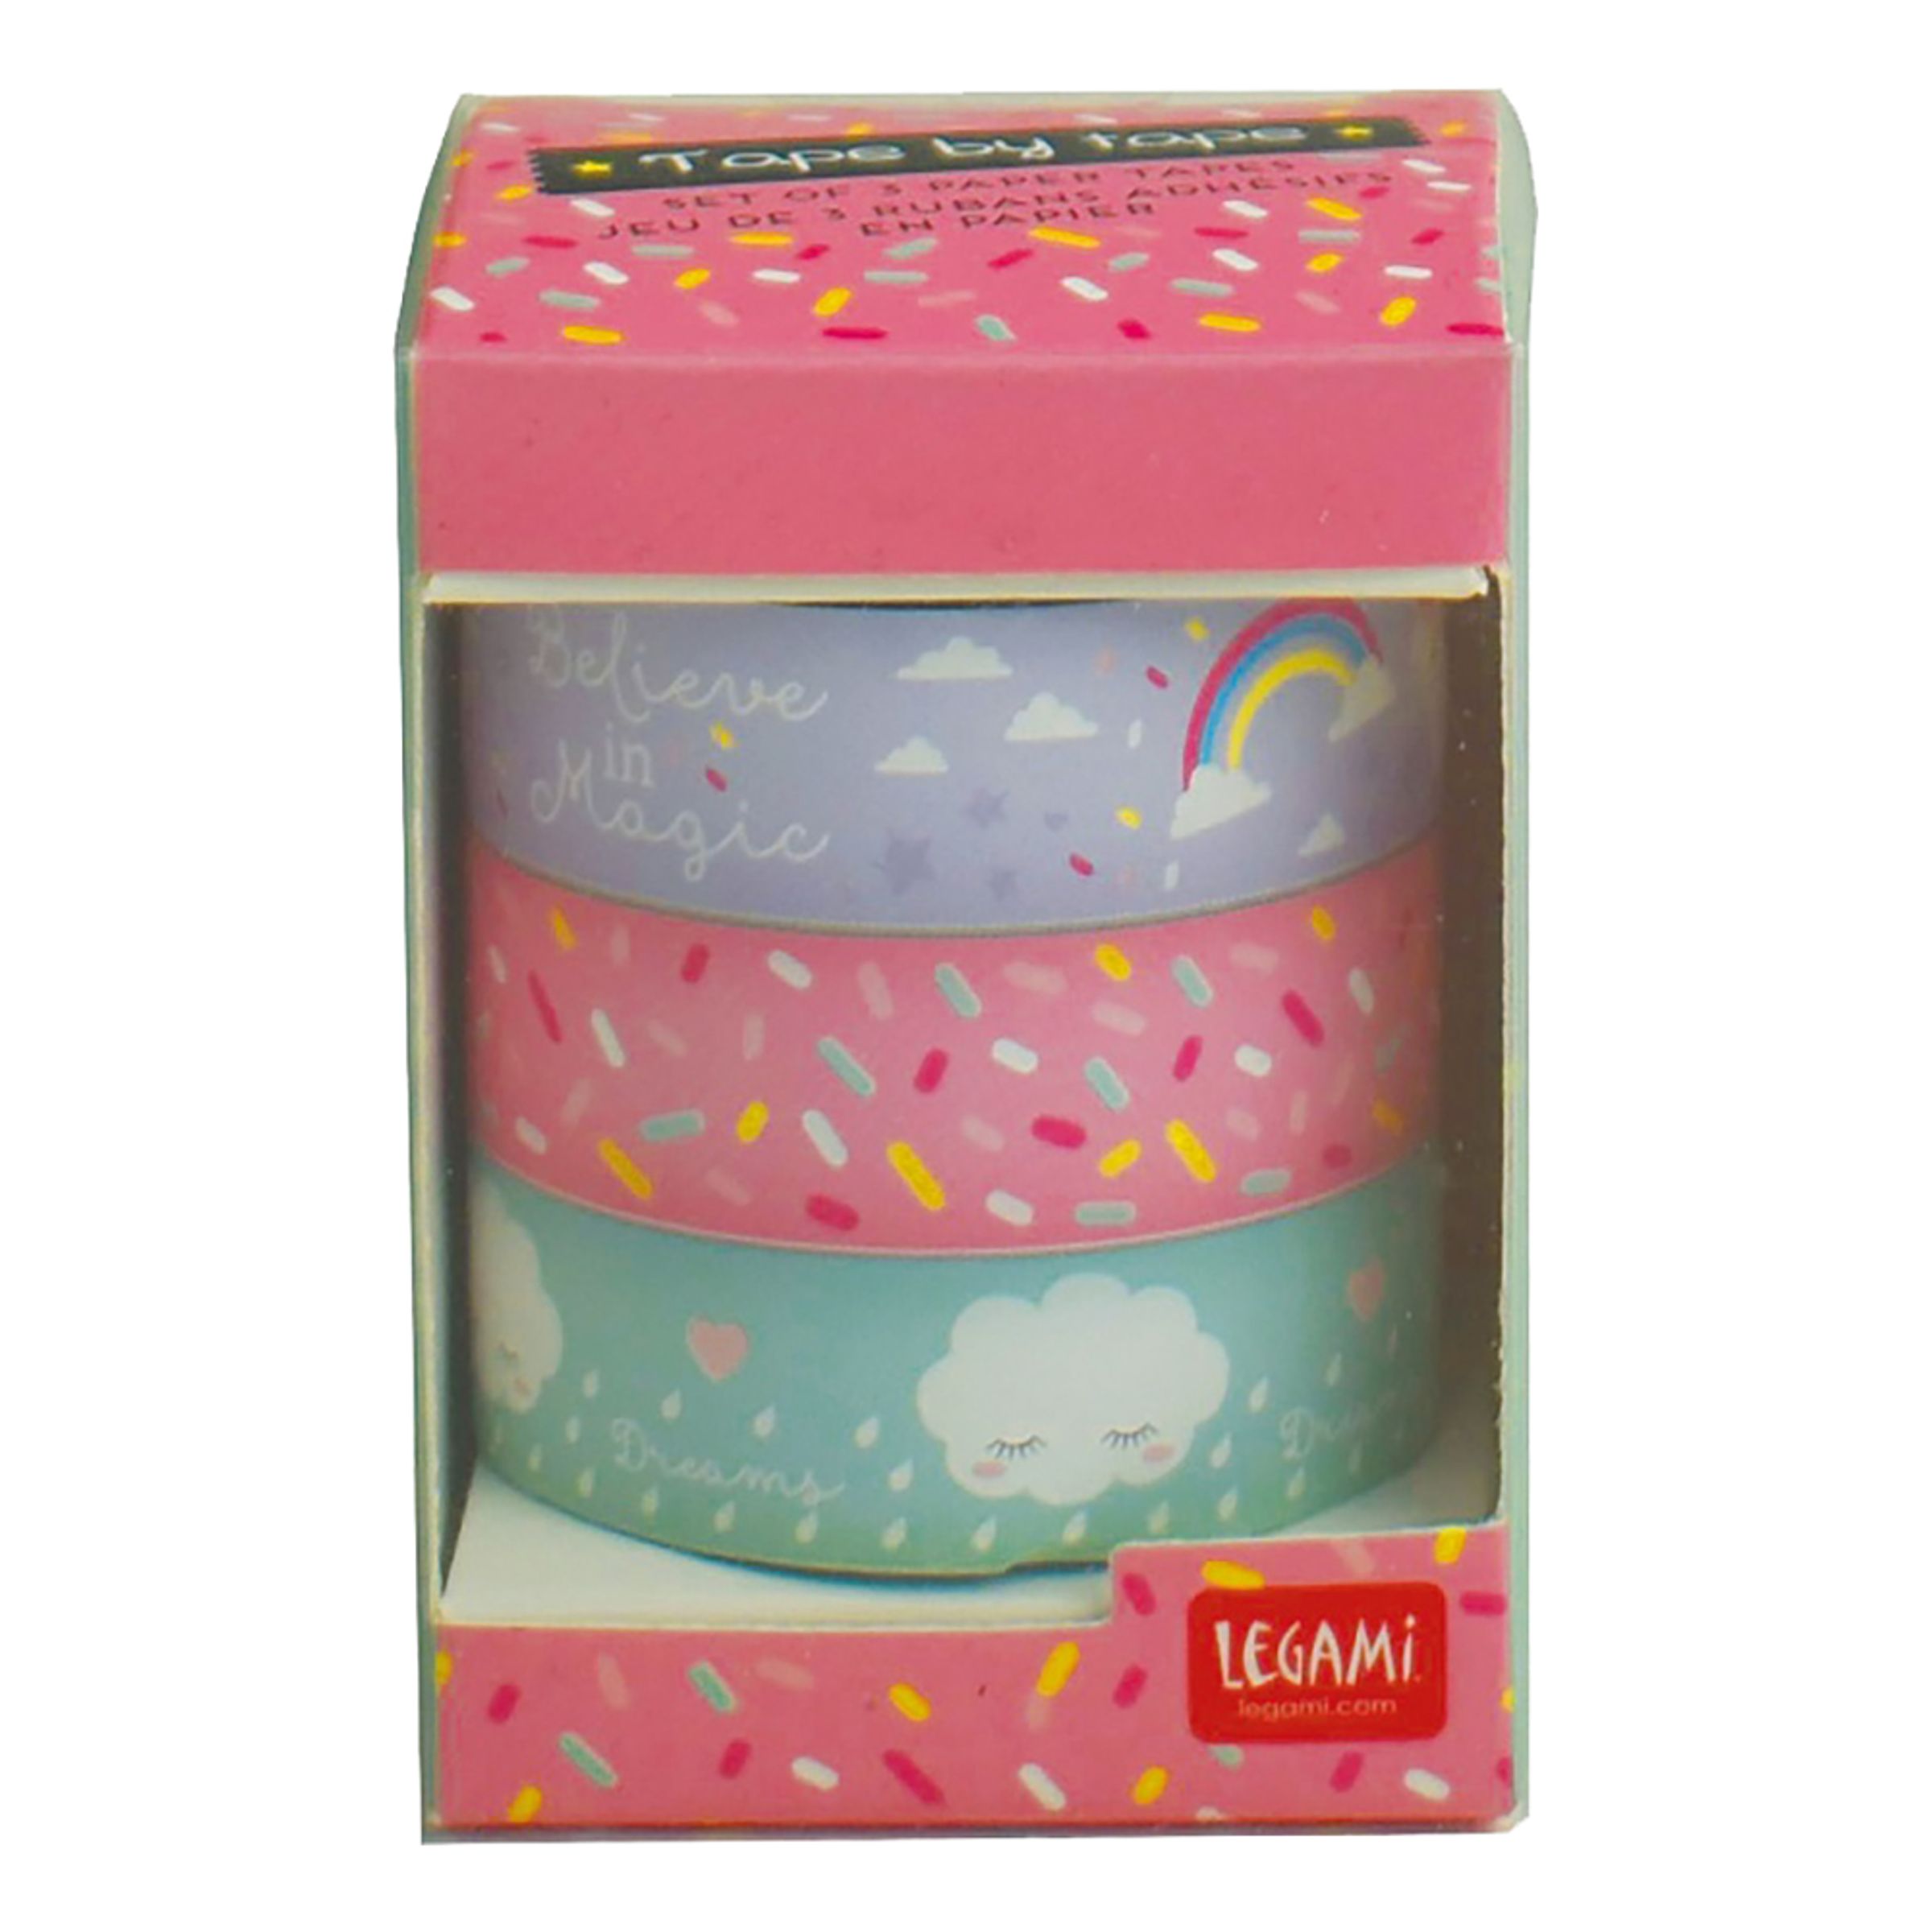 Tape by Tape Unicorn Dreams - 3-pack